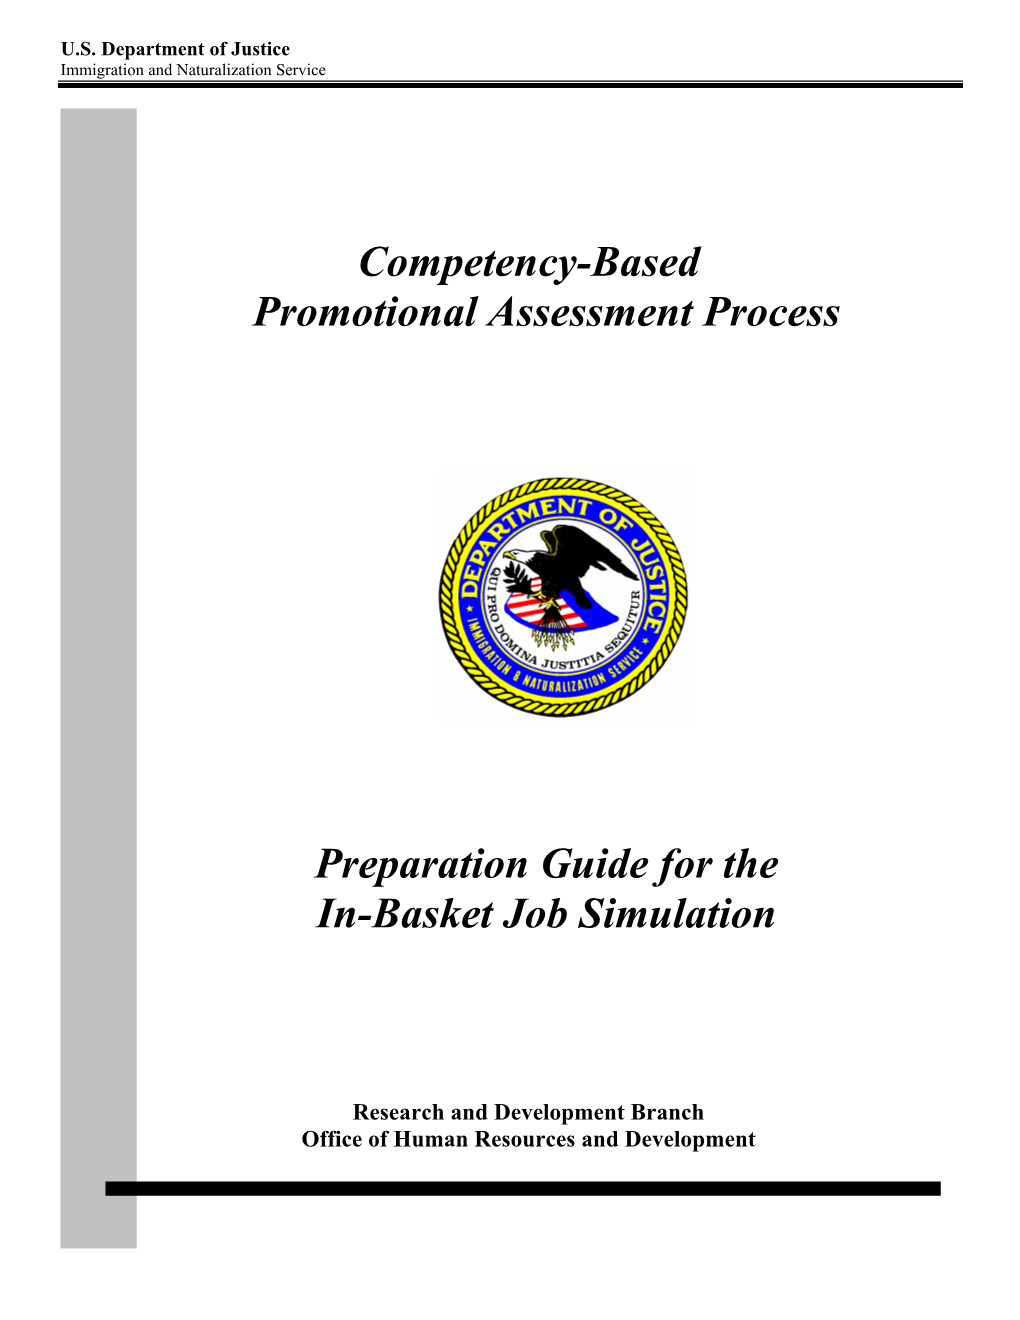 Preparation Guide for the In-Basket Job Simulation